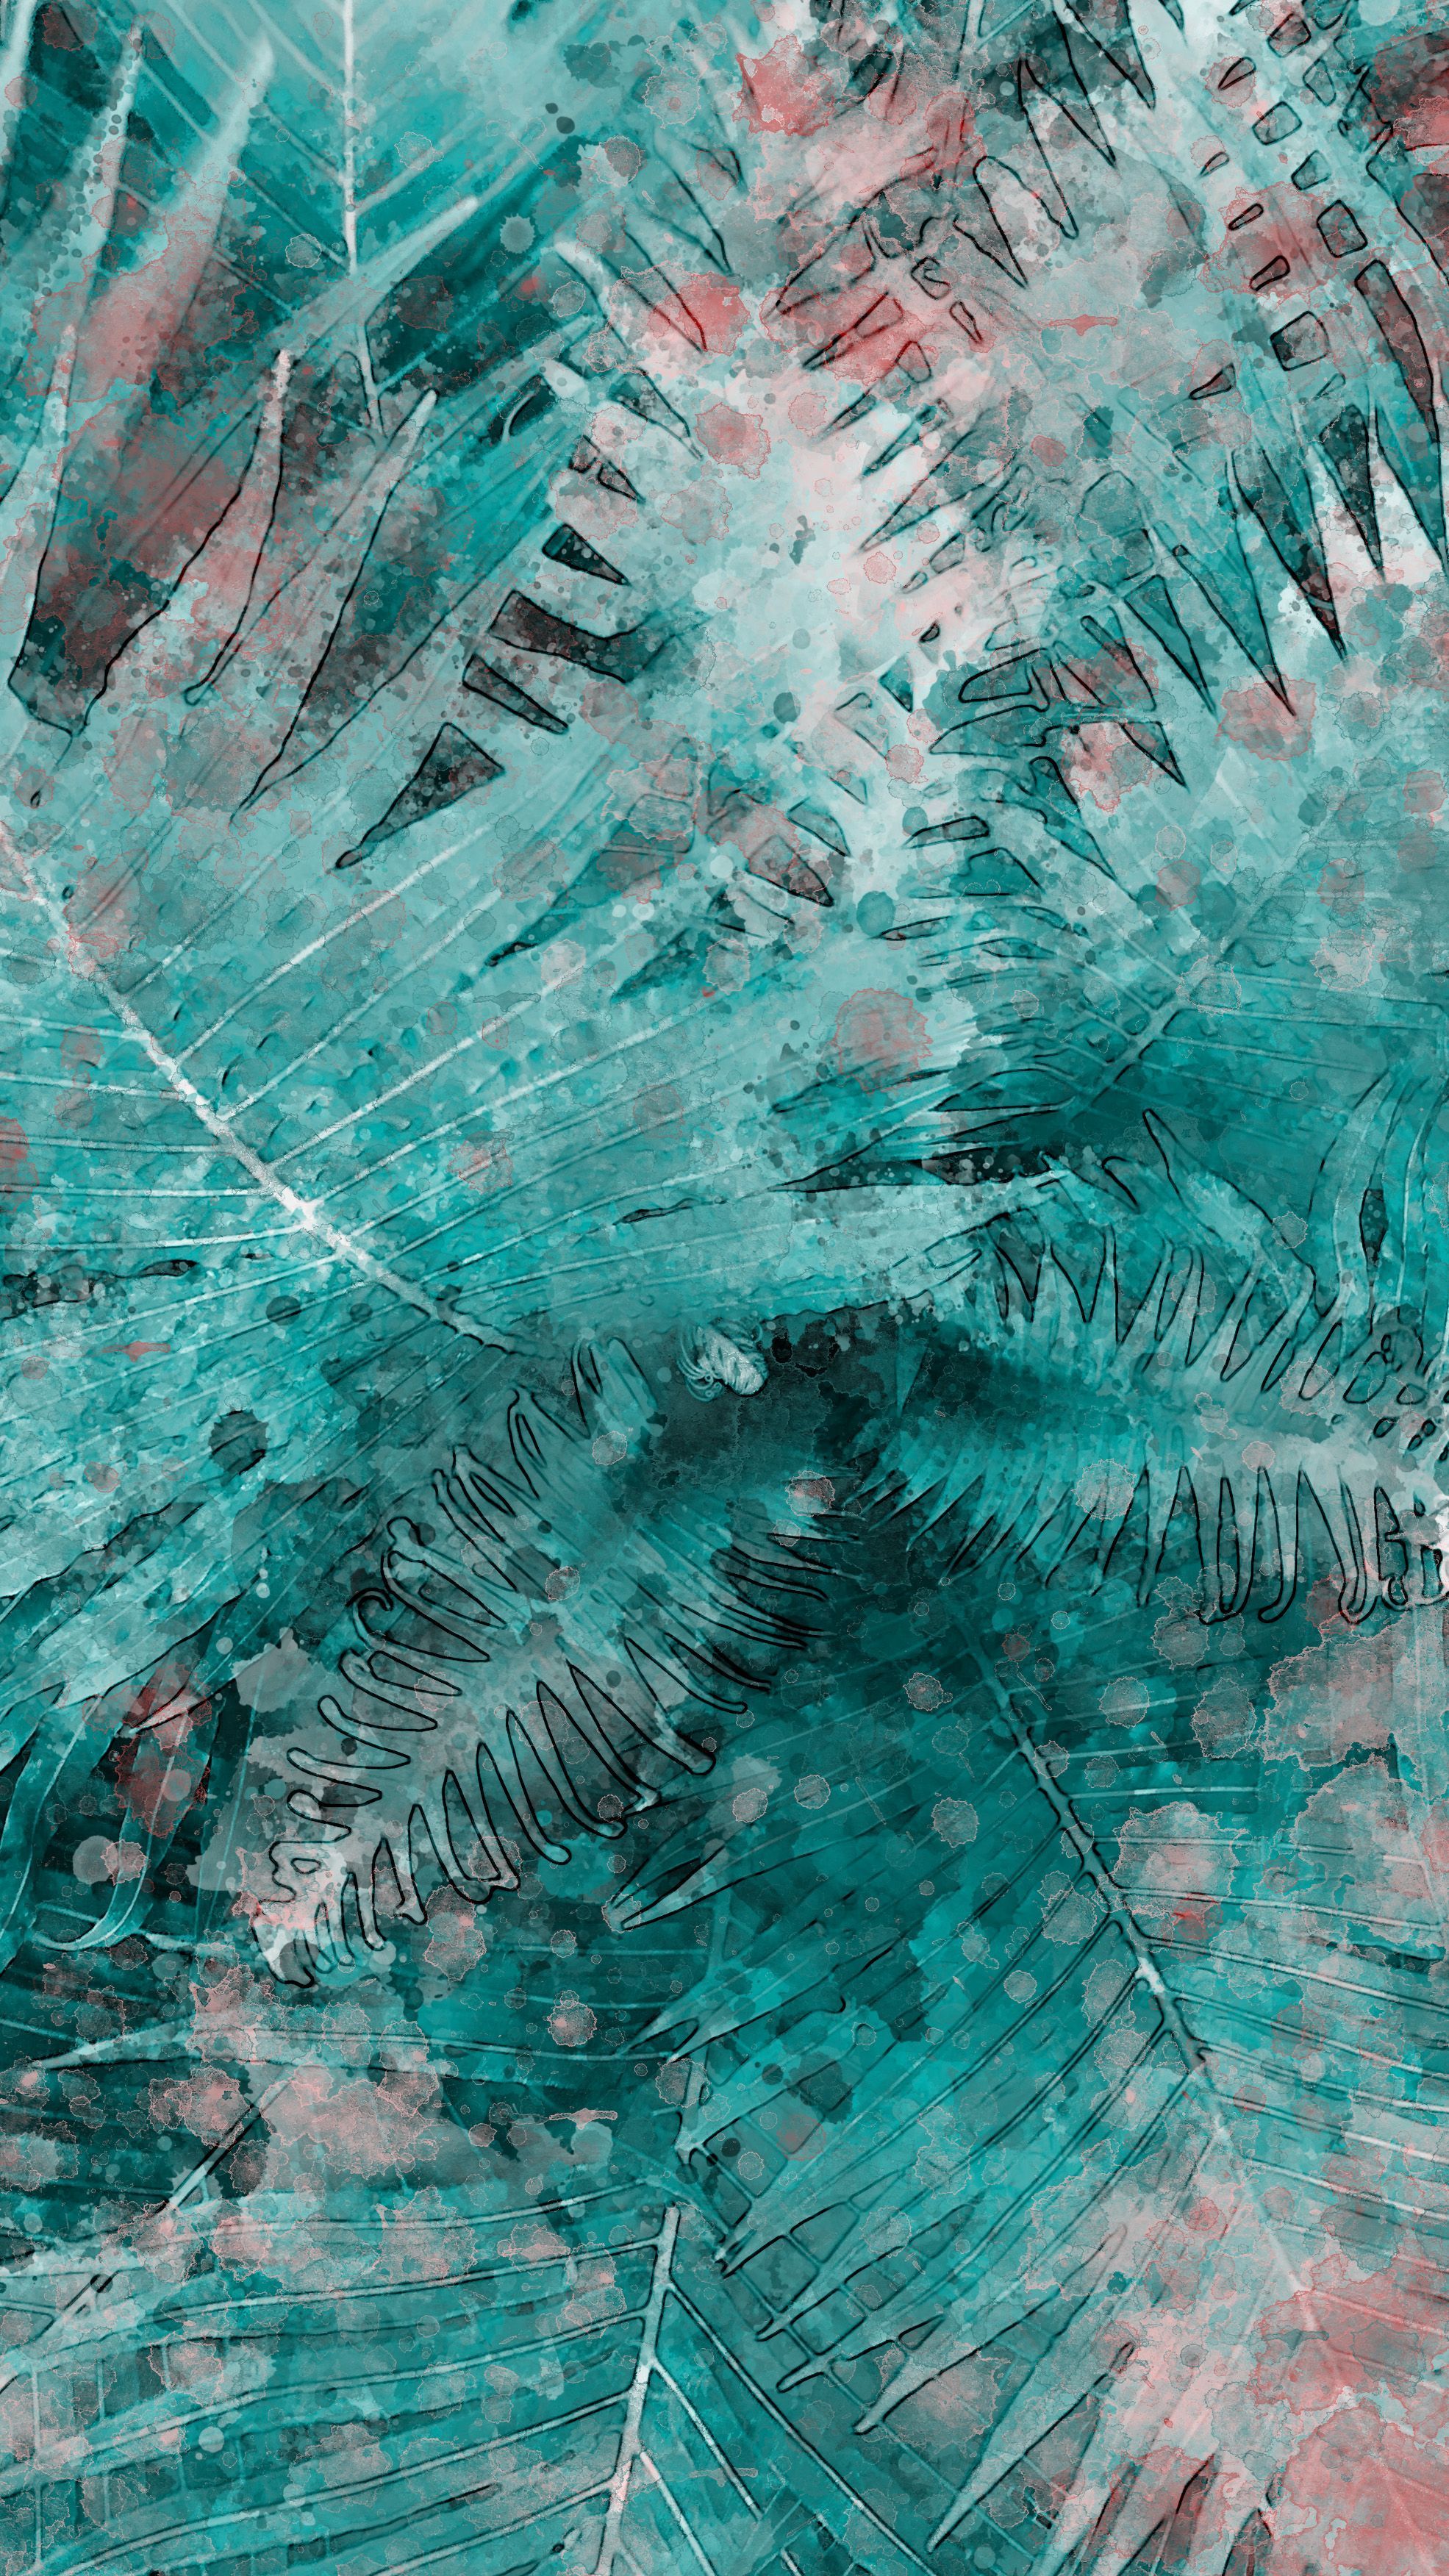 An abstract image of green and pink foliage - Cyan